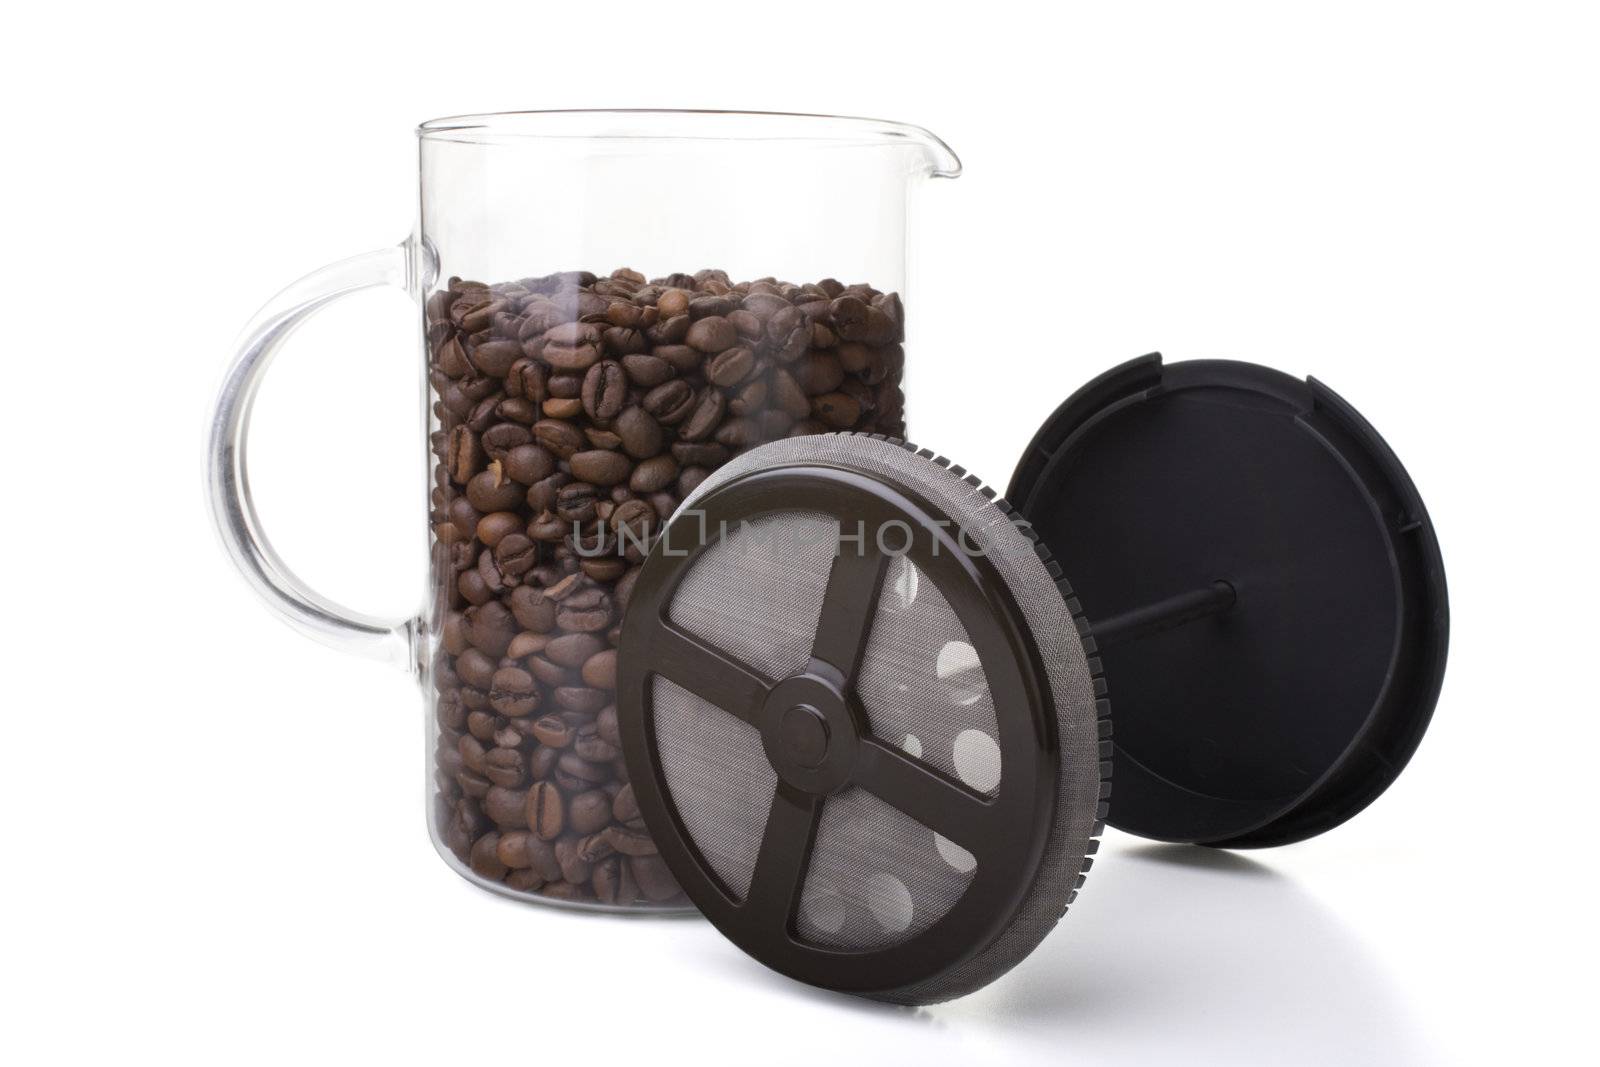 French press full of coffee beans, vertical orientation.